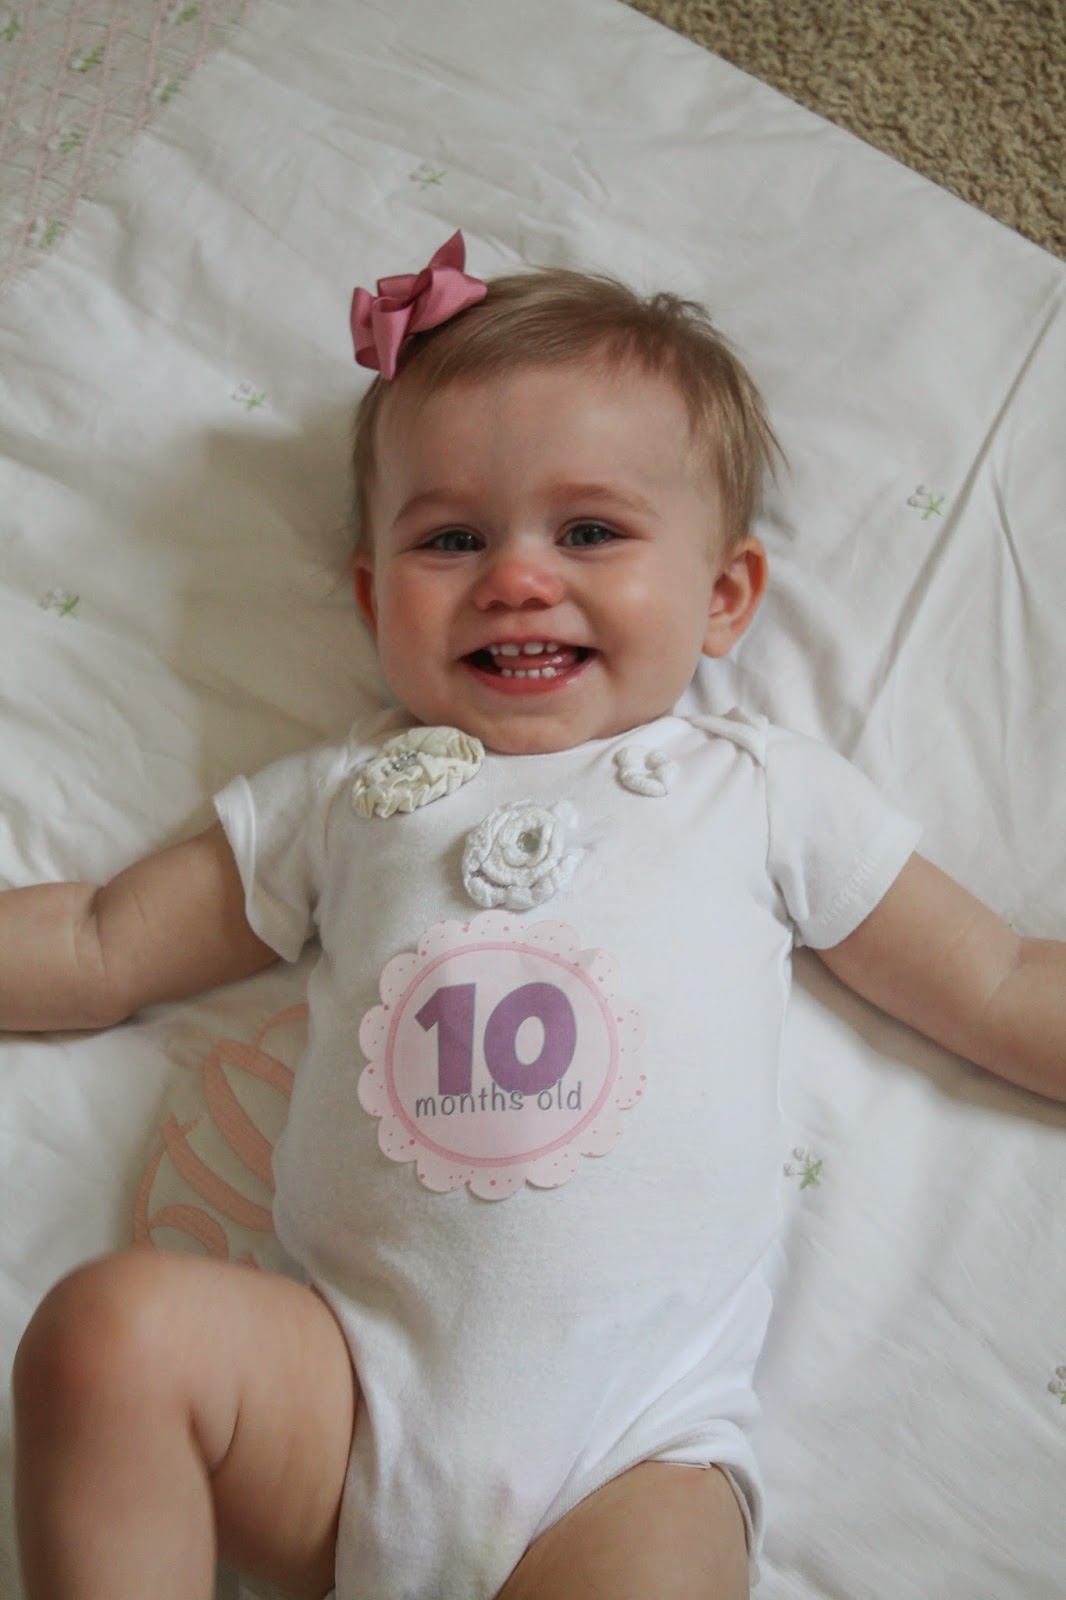 Gratefully Inspired: Georgia Grace is 10 months old!